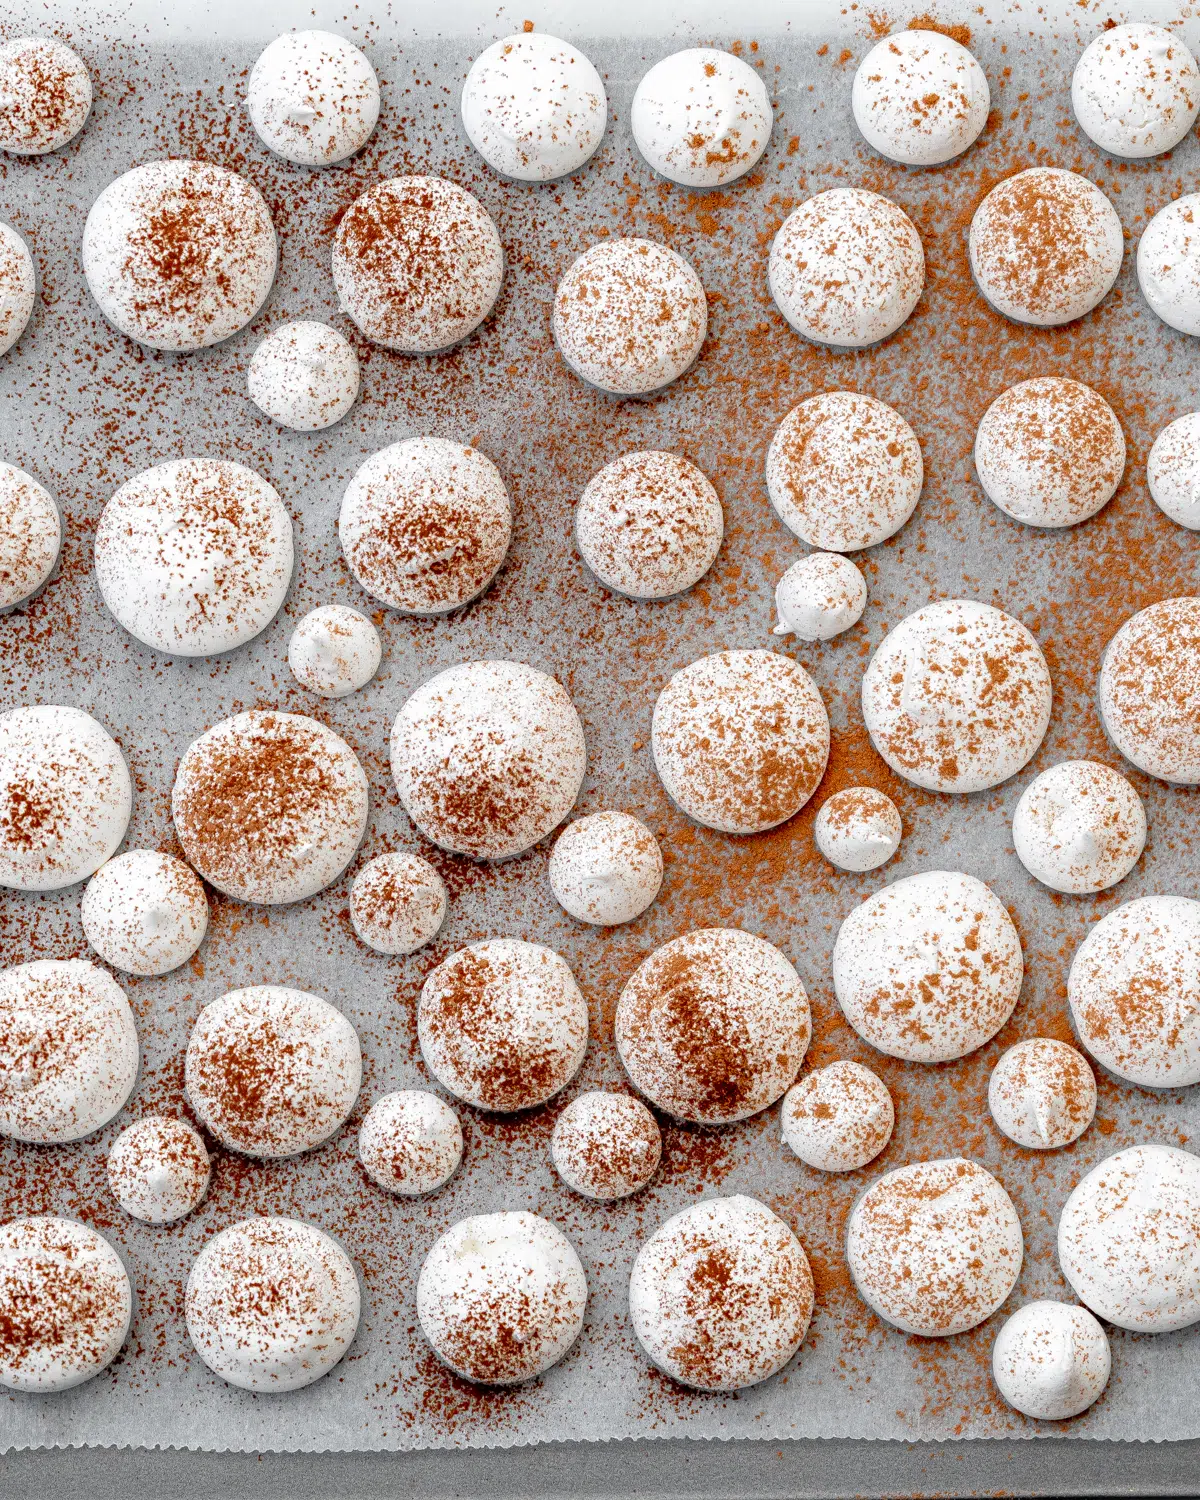 aquafaba meringue cookies dusted with cocoa powder on a baking sheet.